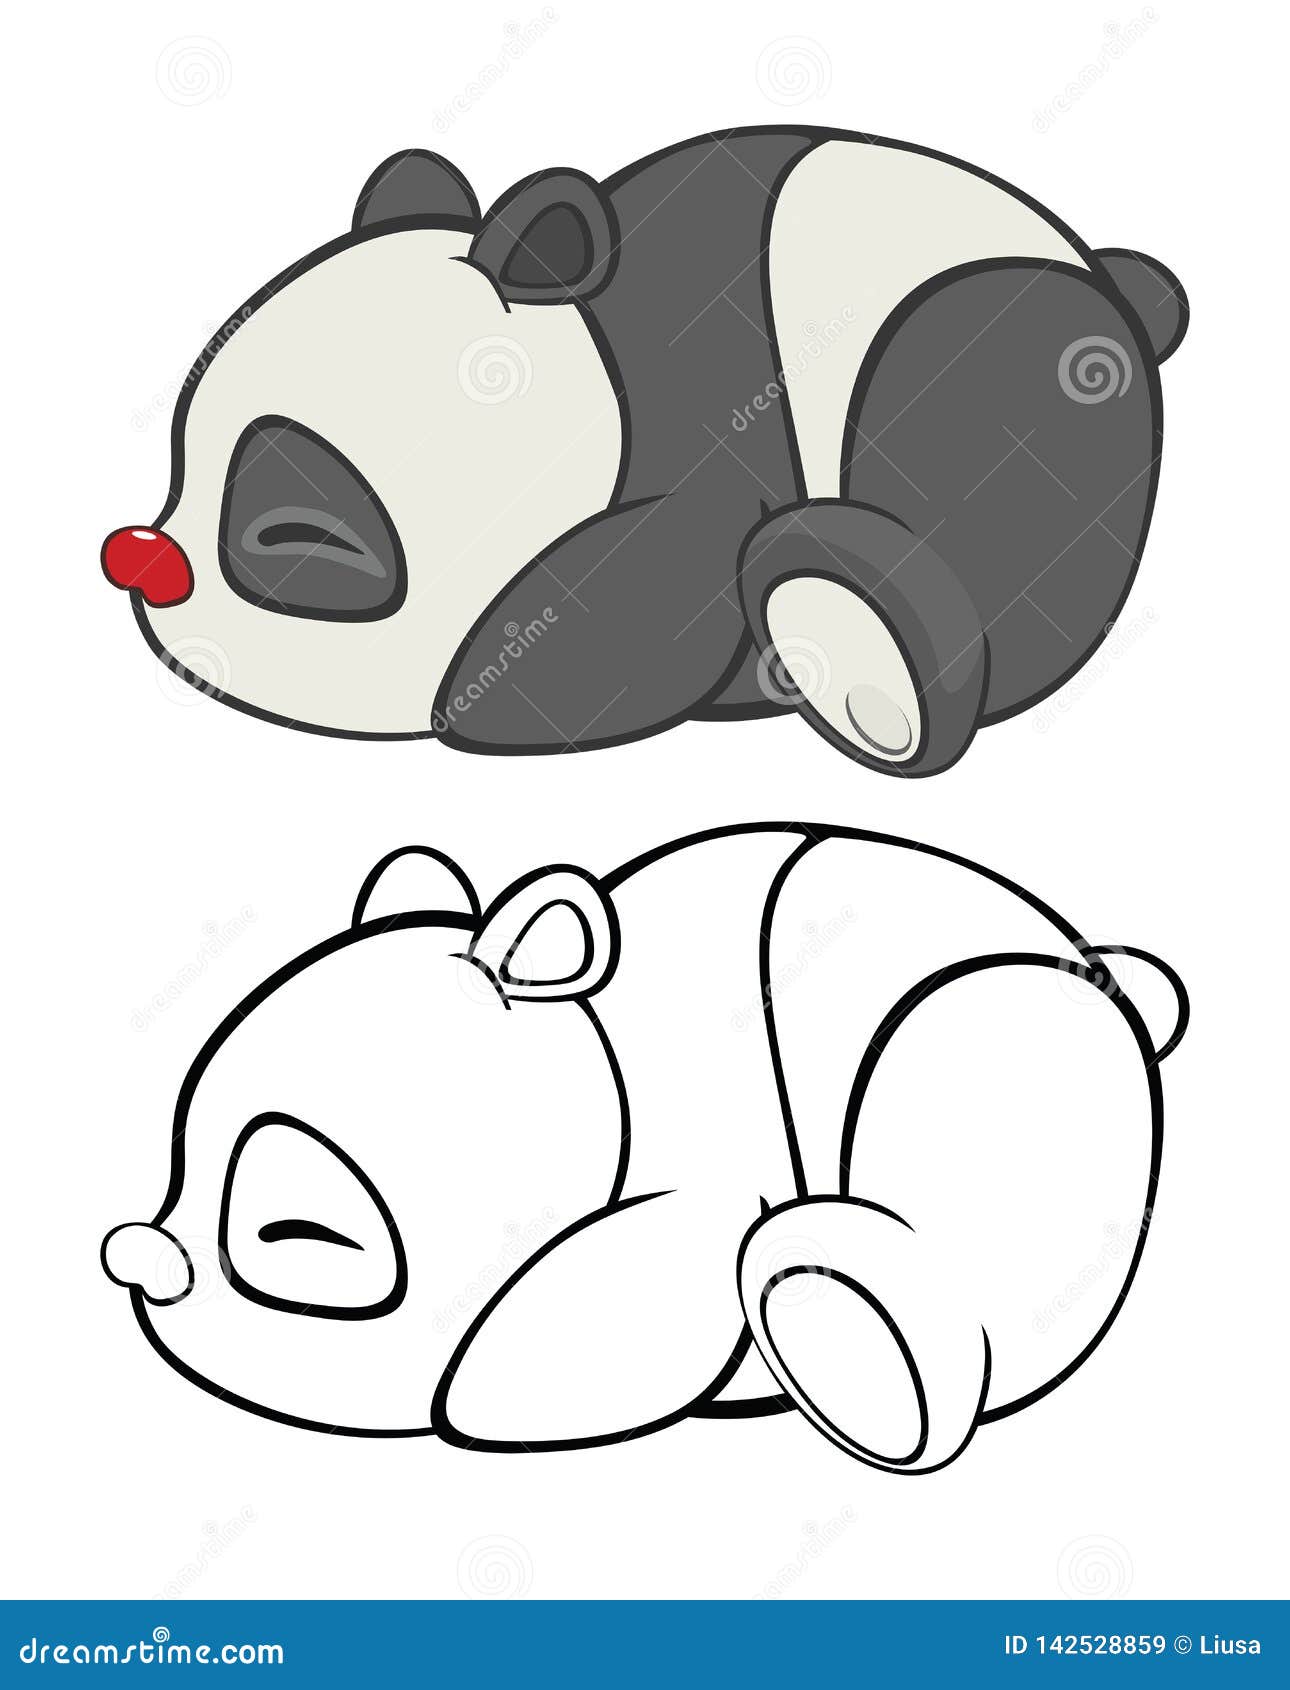 Vector Illustration of a Cute Cartoon Character Panda for You Design and  Computer Game. Coloring Book Outline Set Stock Vector - Illustration of  coloring, game: 142528859